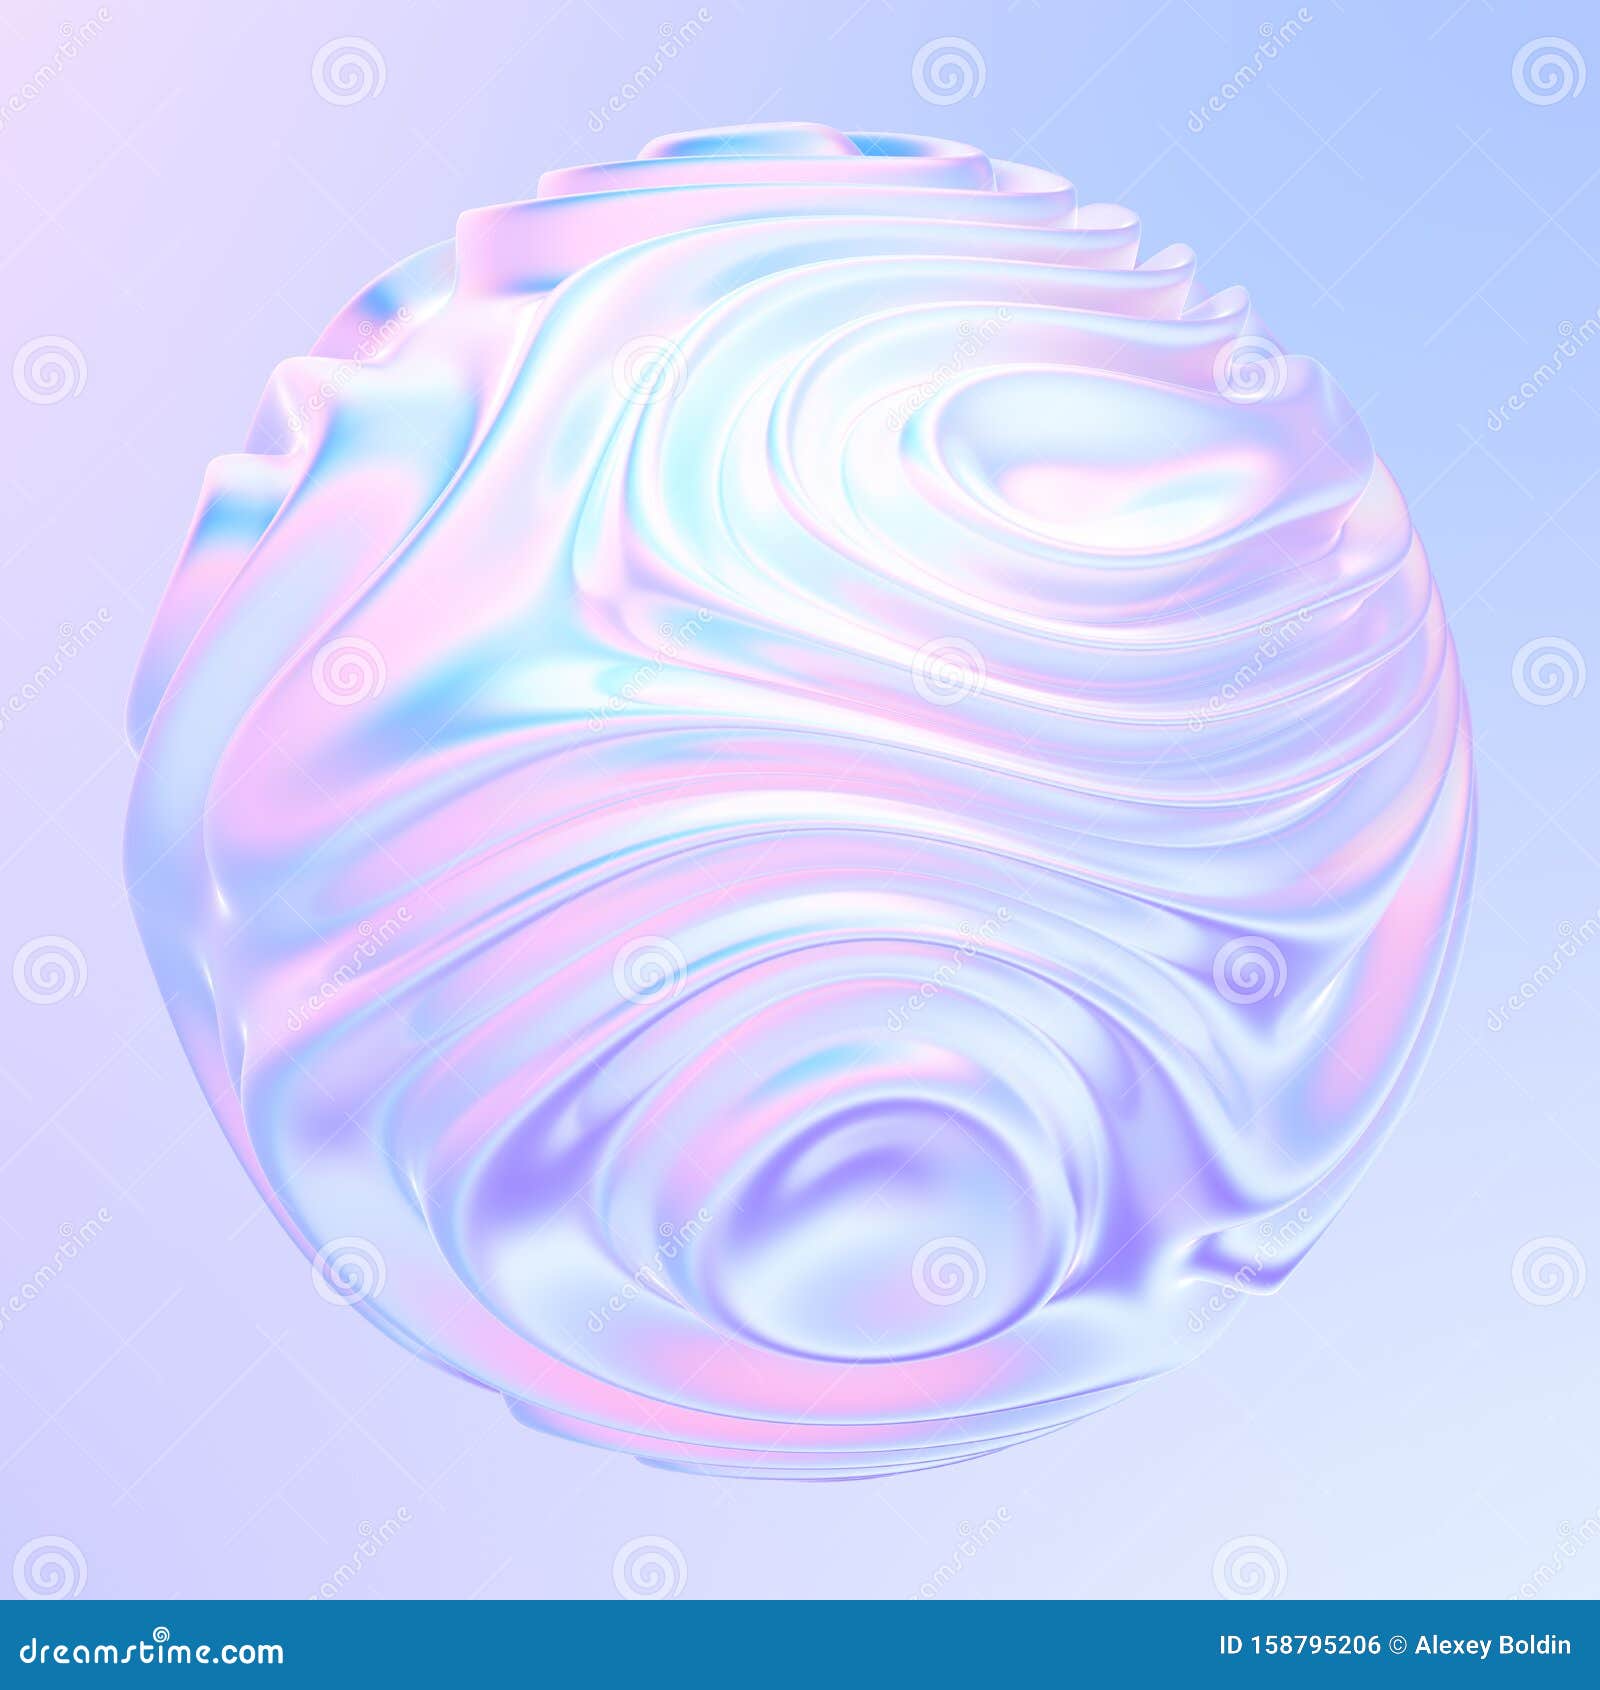 abstract metallic holographic colored 3d fluid  with waves and ripples